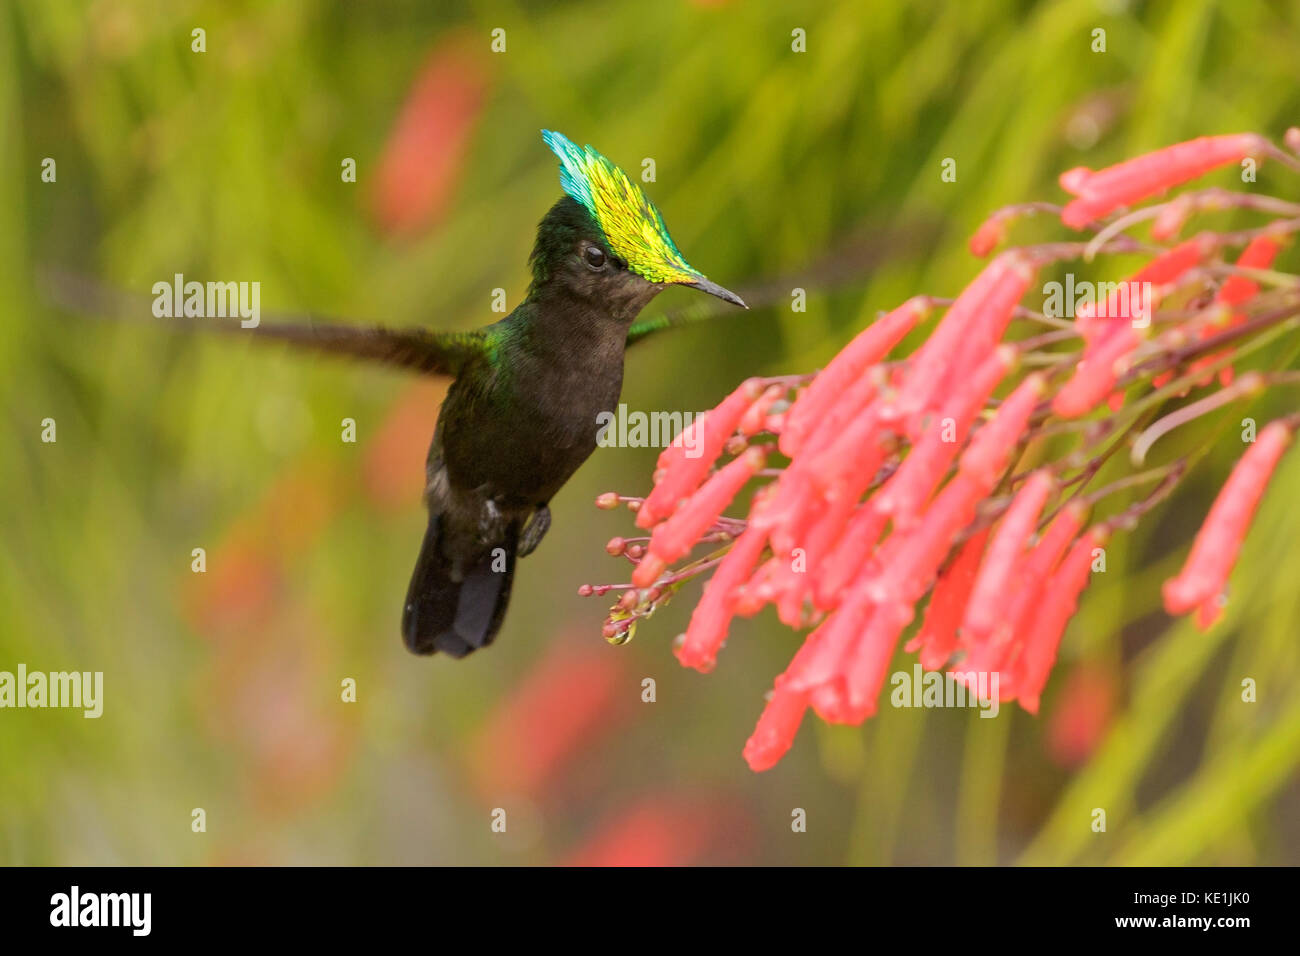 Antillean crested hummingbird (Orthorhyncus cristatus) flying and feeding at a flower on the Caribbean Island of Martinique. Stock Photo